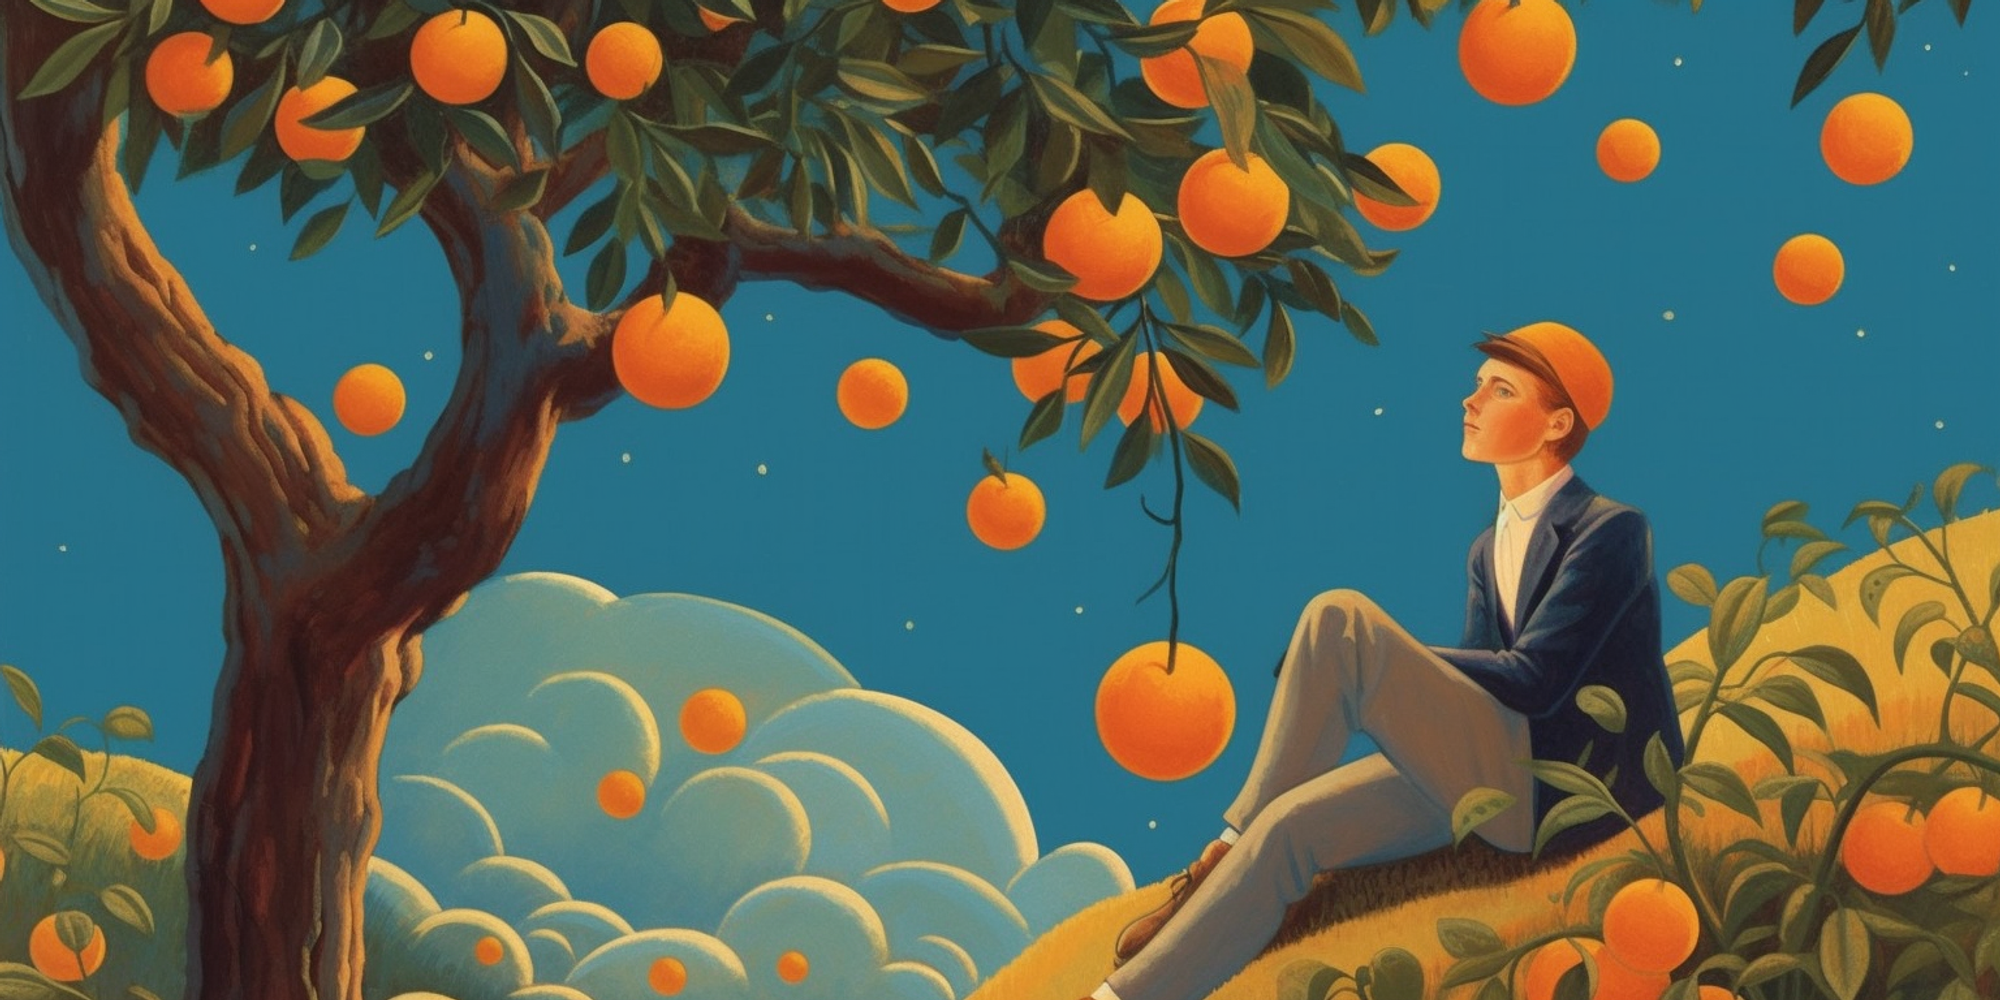 moodyanna_a_poster_of_man_in_the_tree_with_large_oranges_in_the_1f820581-6c99-406e-a6f1-20abac47c697.png